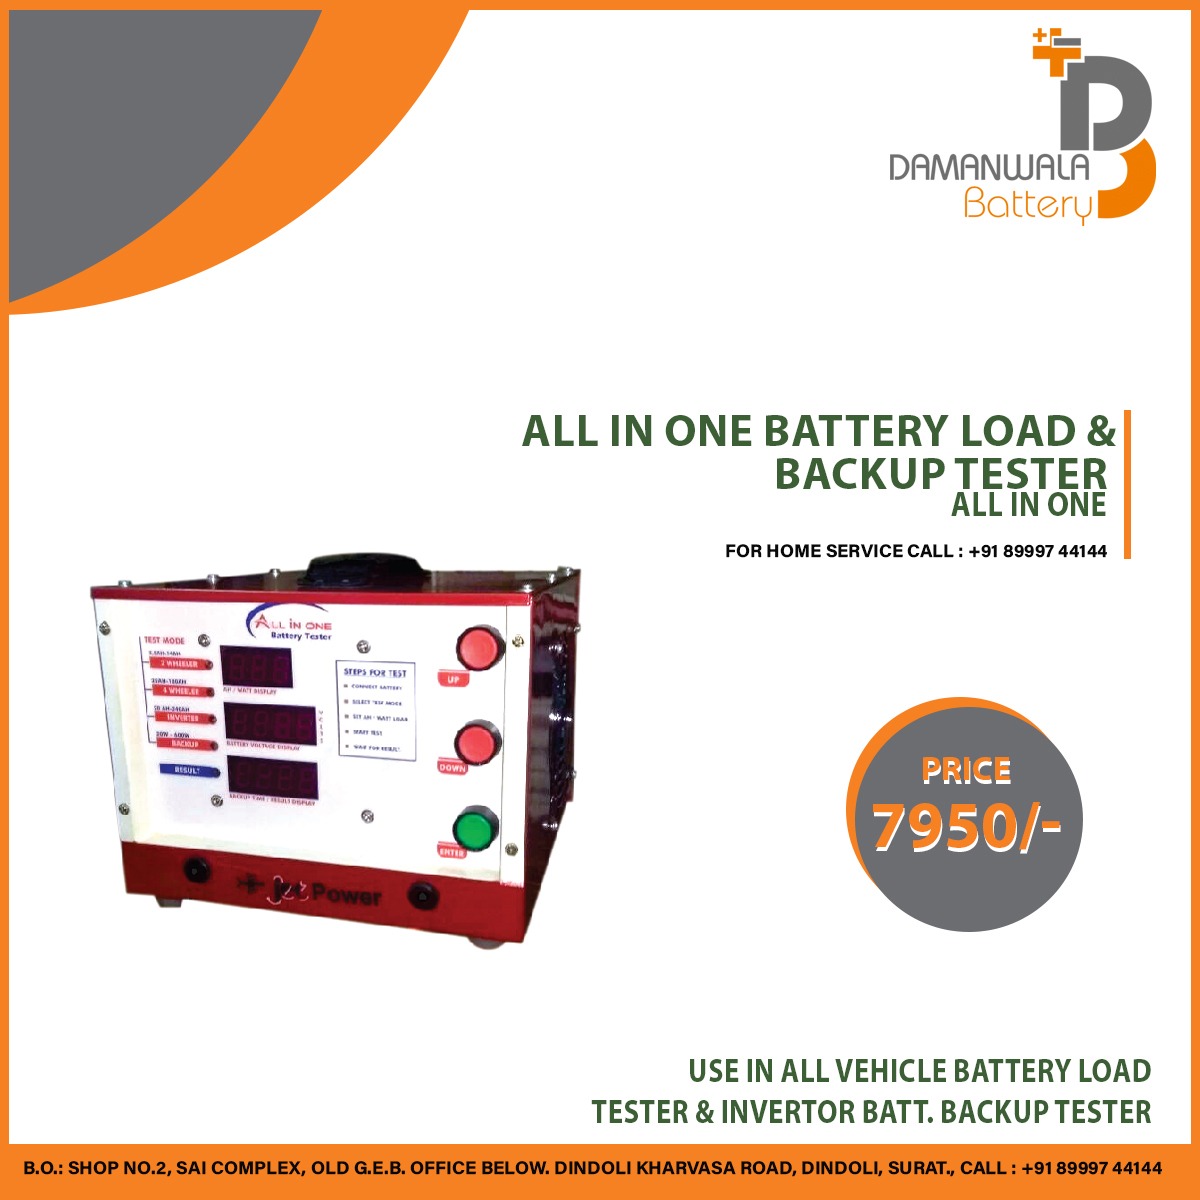 All in one Battery tester load & backup tester